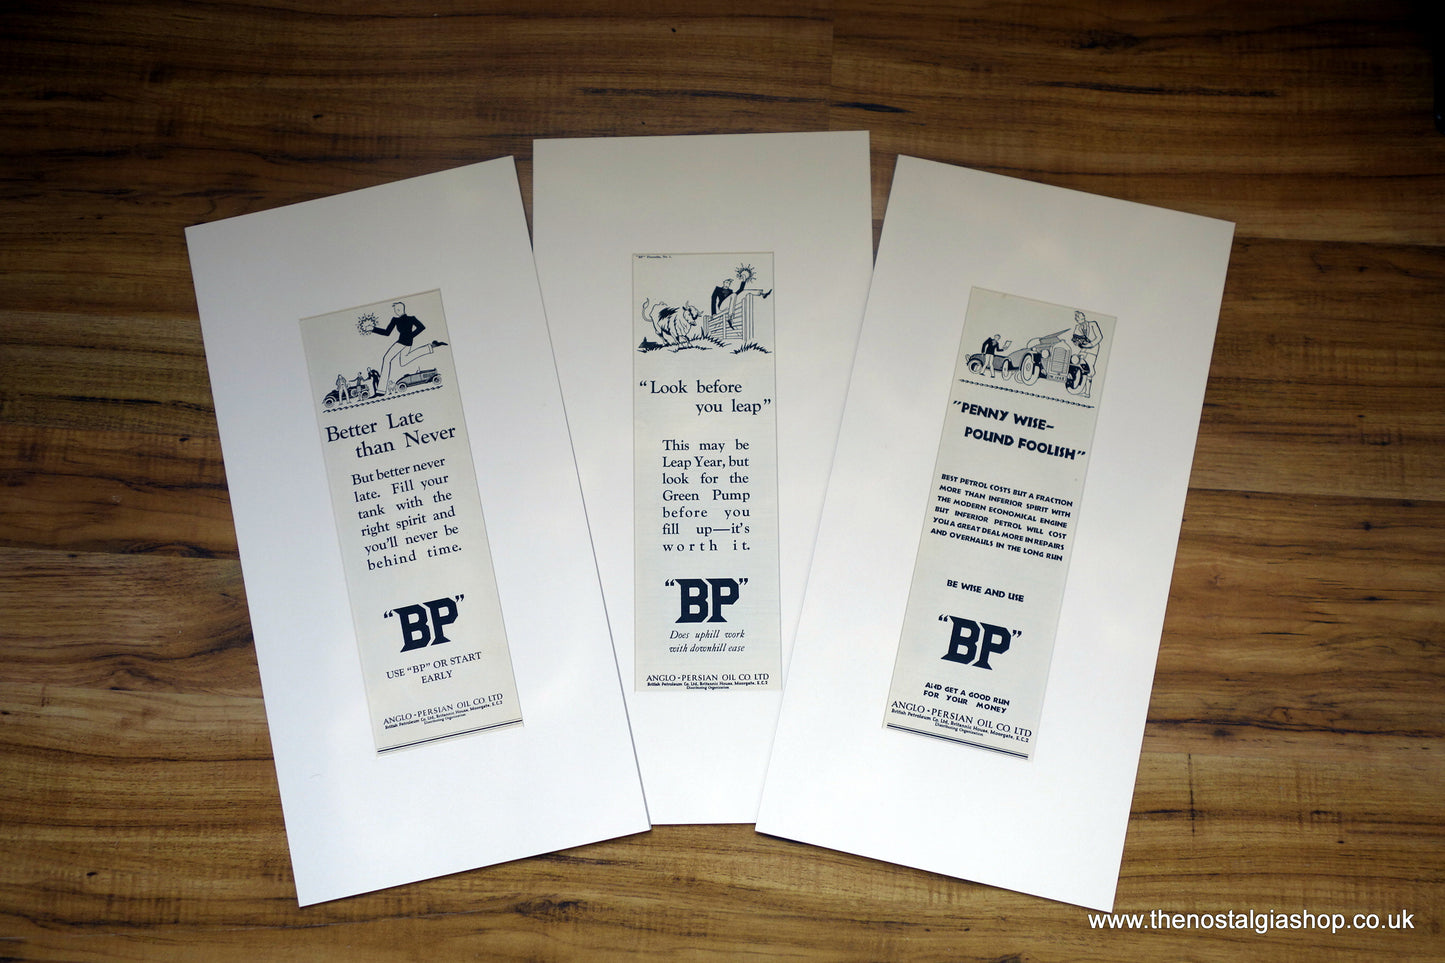 BP Anglo-Persian Oil Co. Ltd. Set of 3 Large Original Adverts 1928 (ref AD200577M)